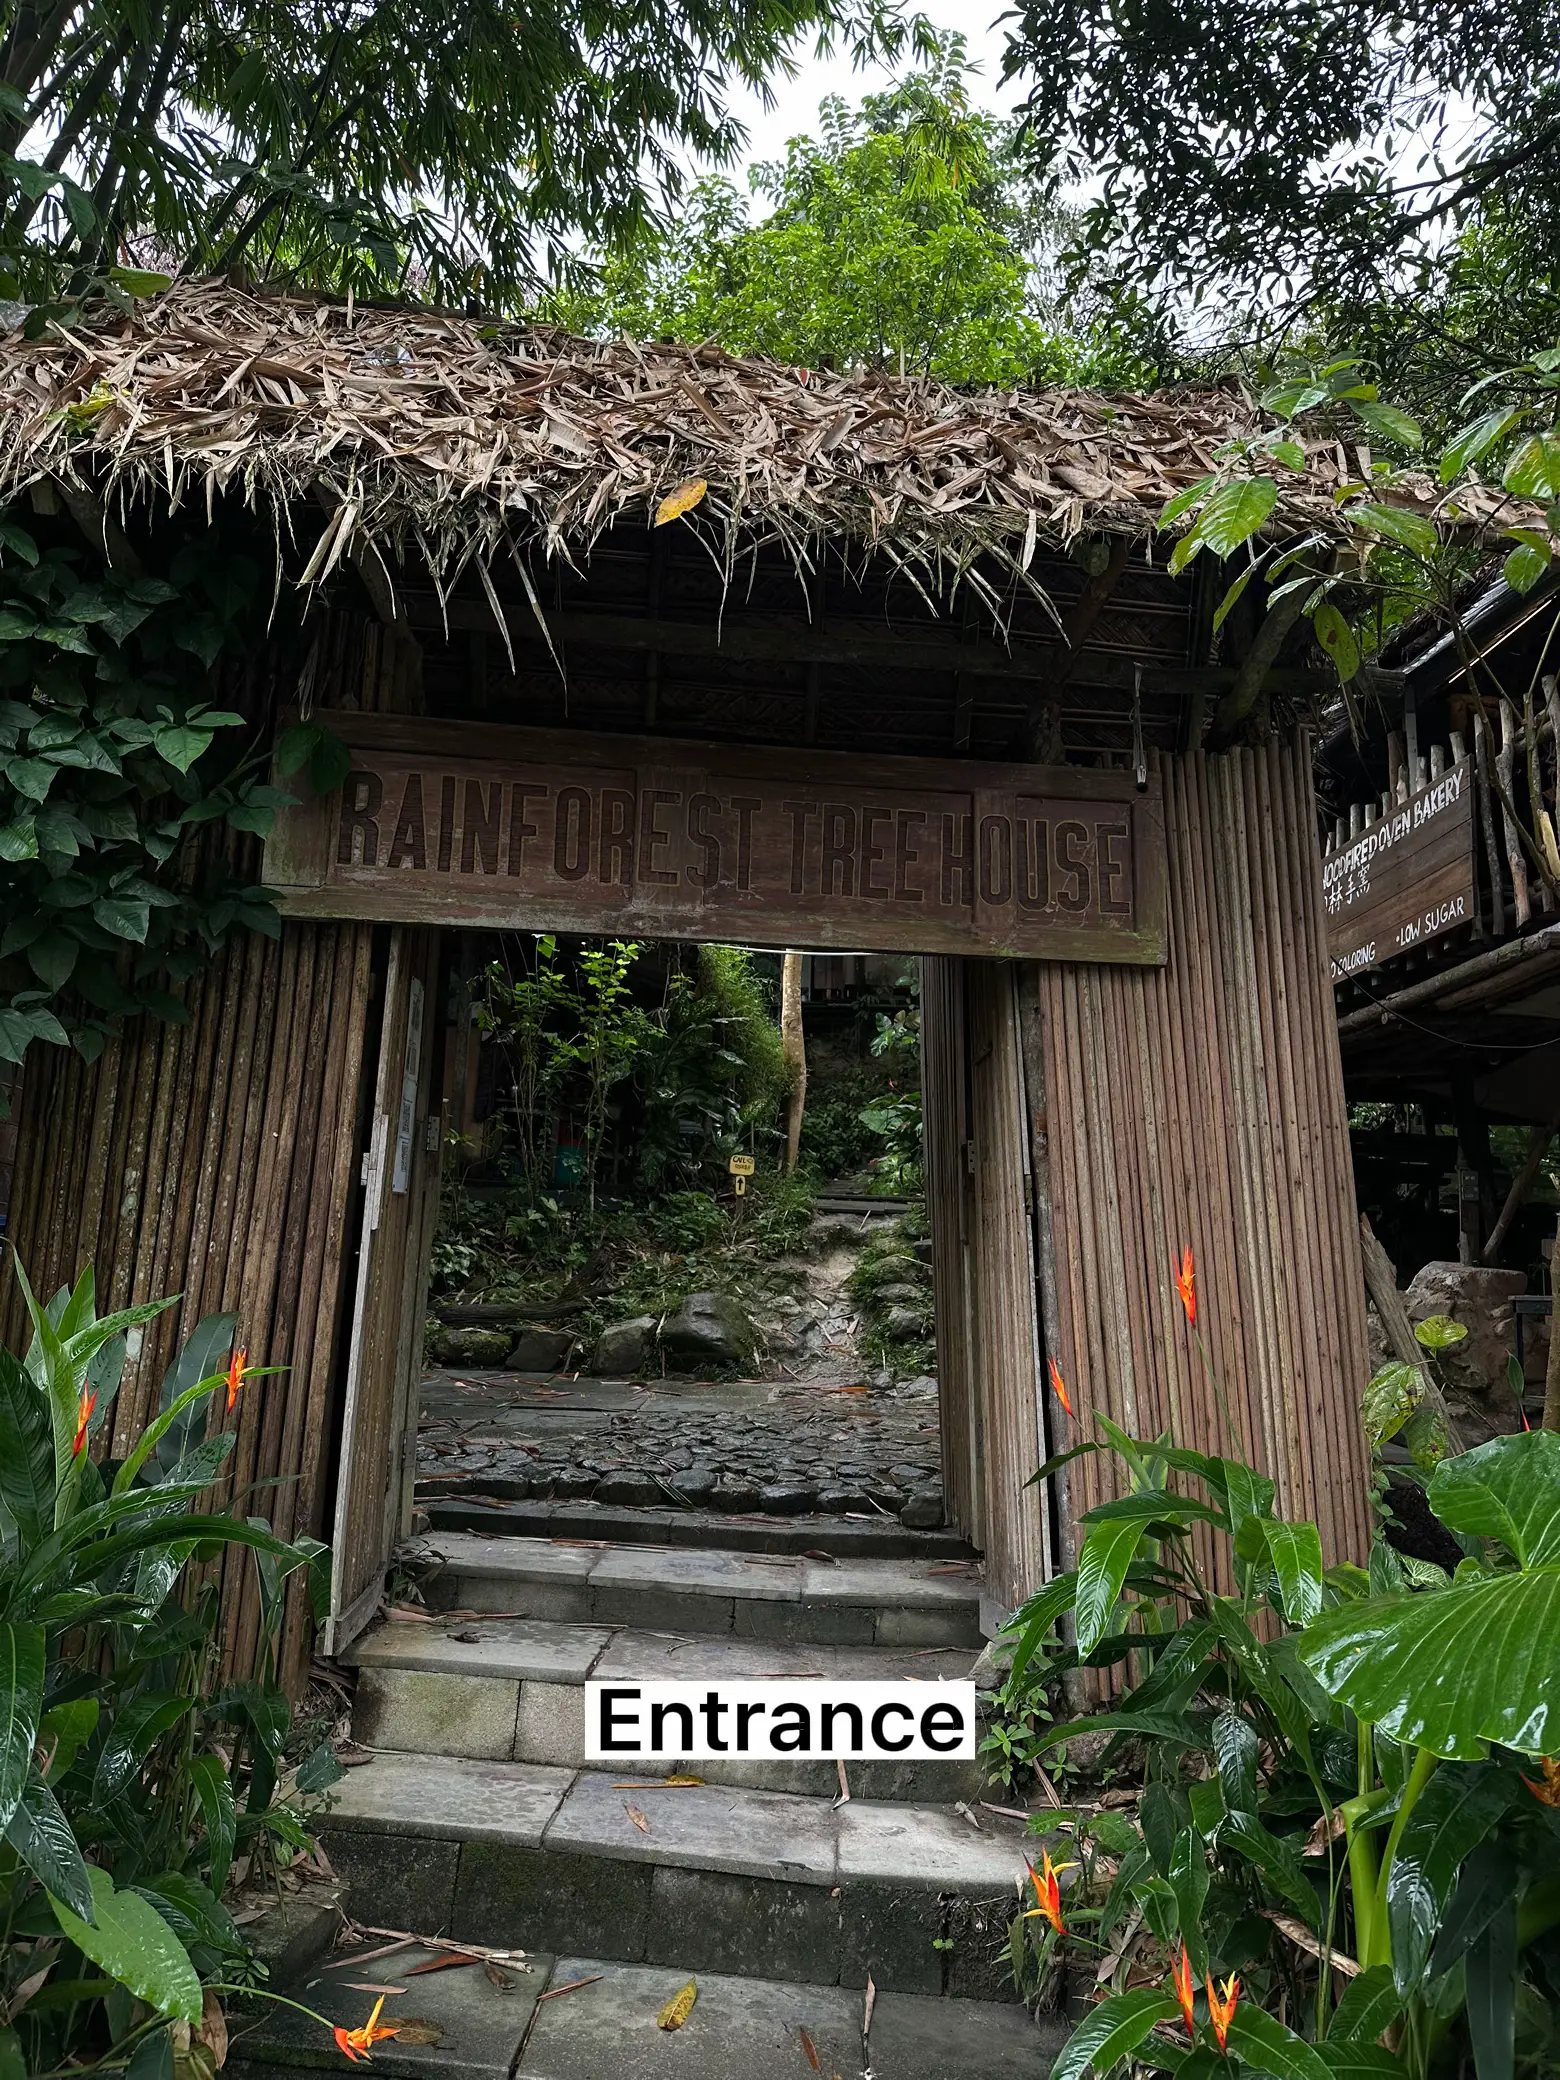 50mins from SG, a Treehouse Cafe in the Rainforest's images(9)